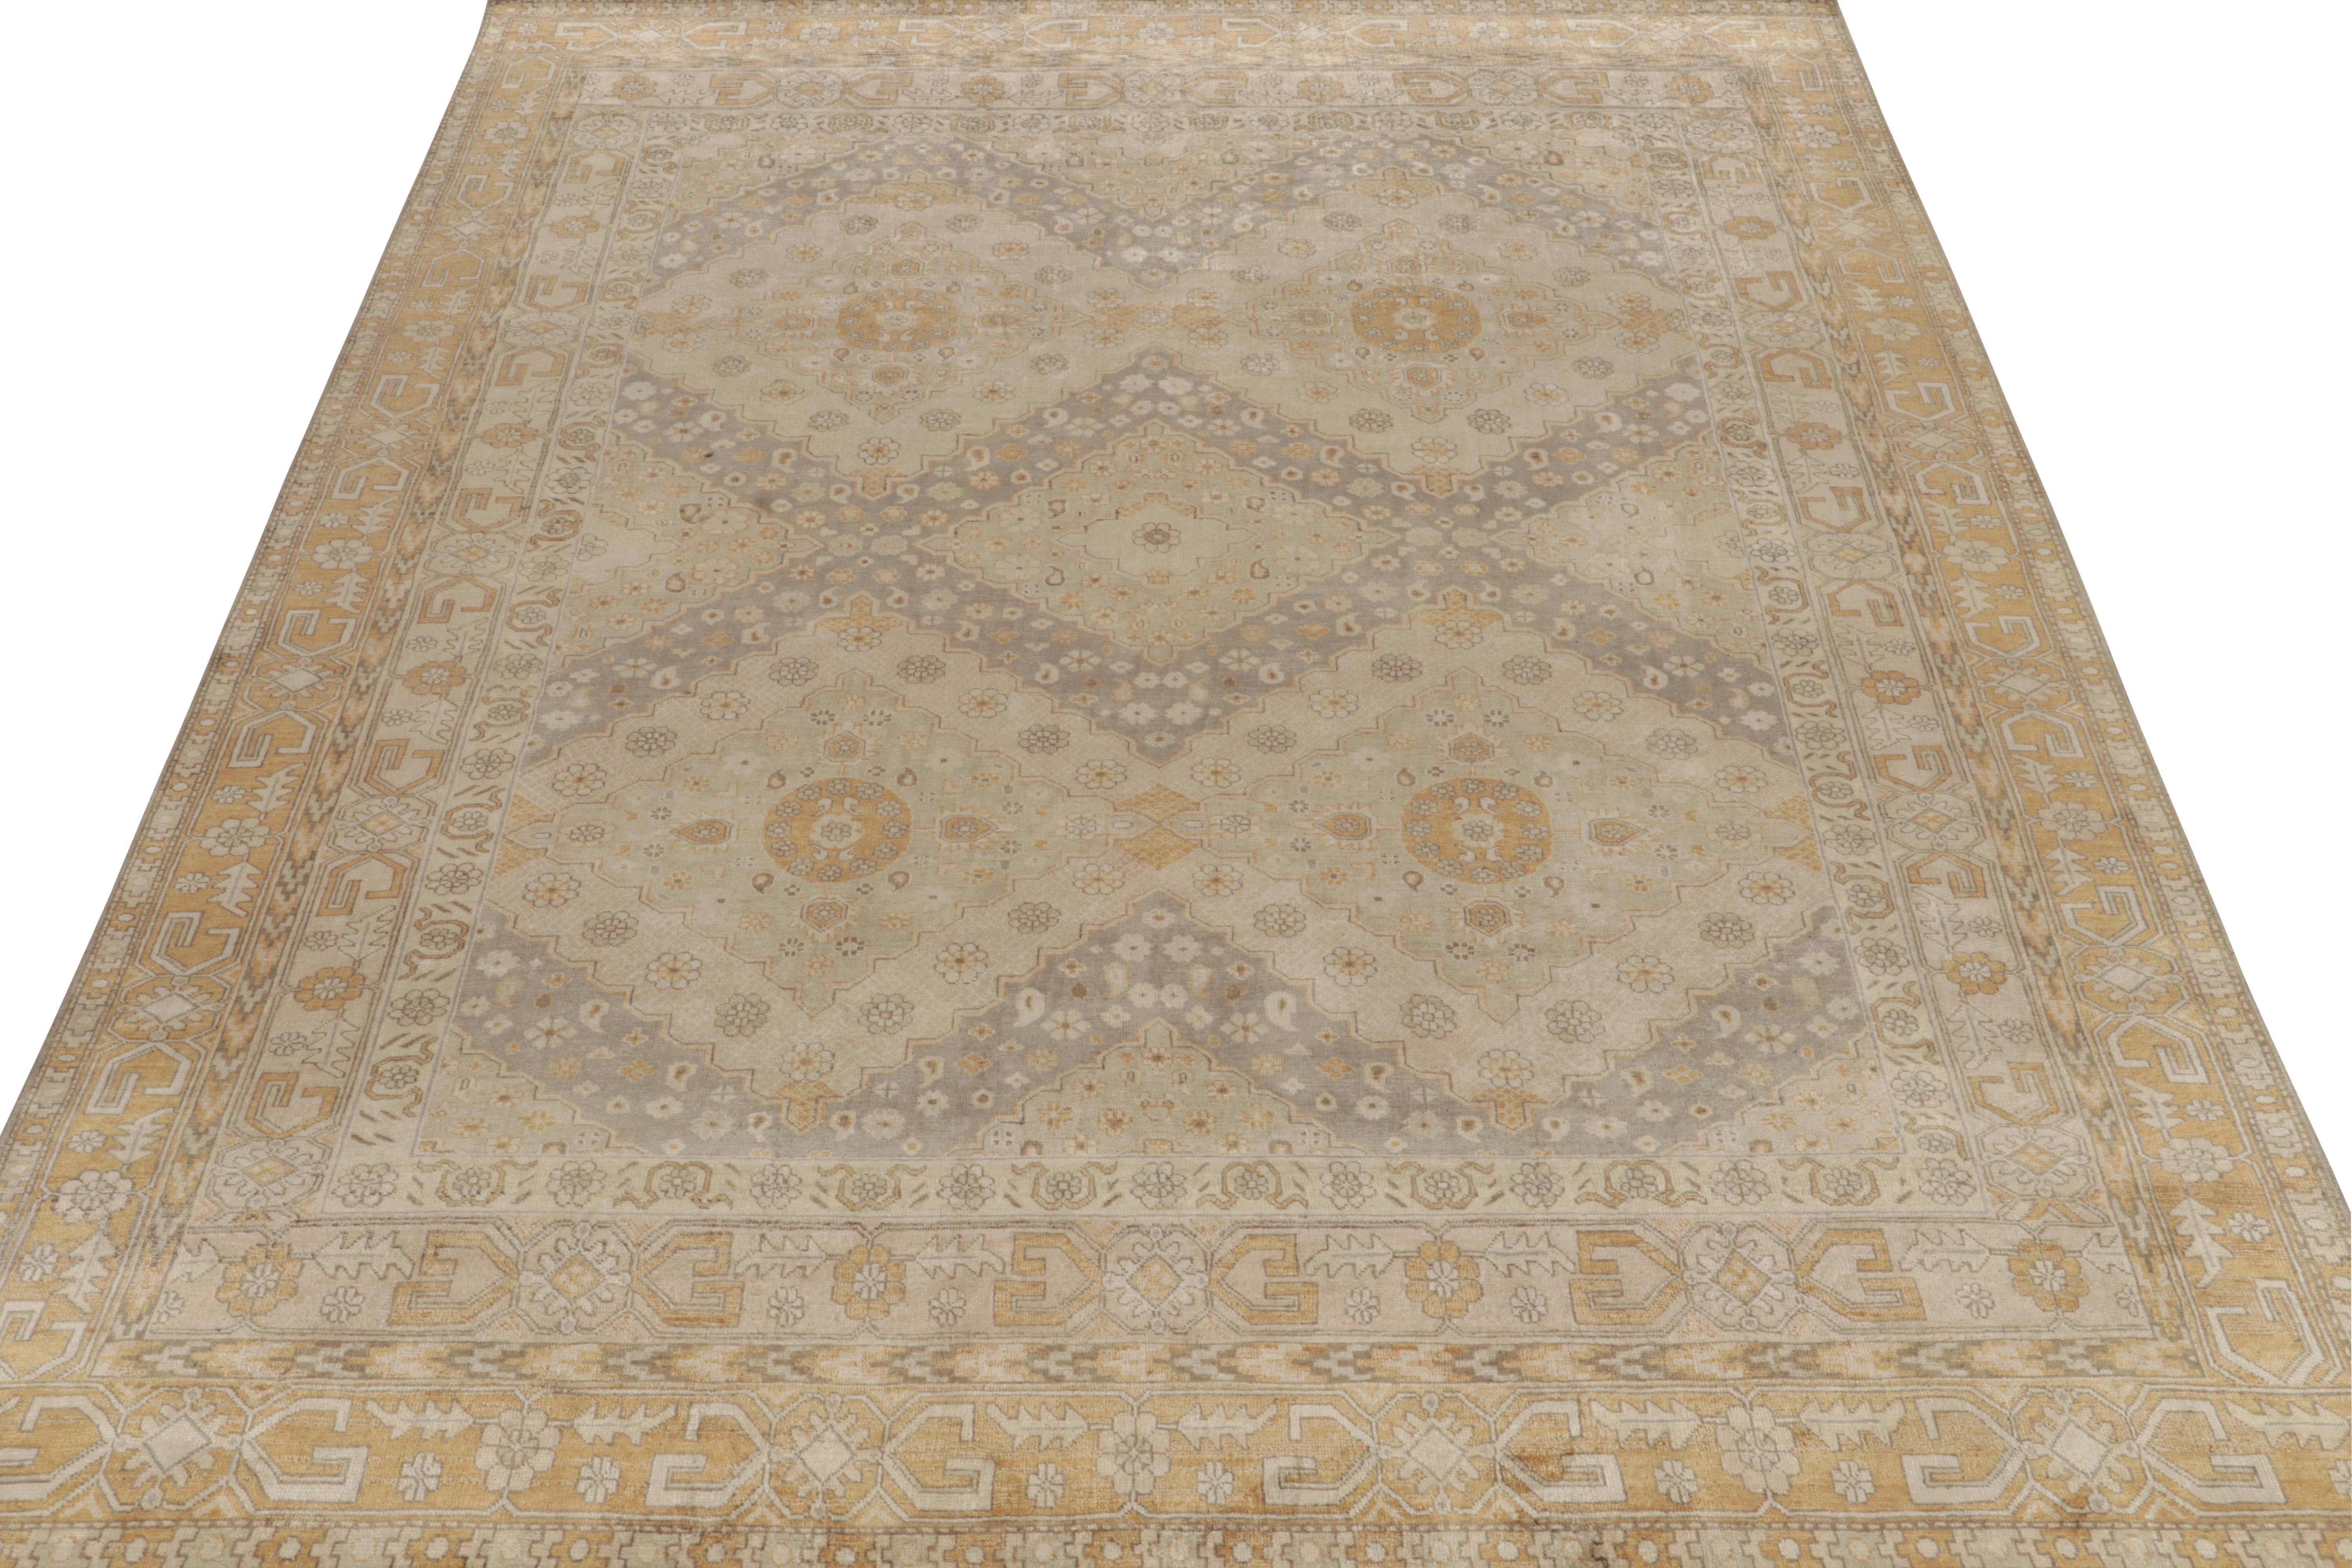 Indian Rug & Kilim’s Classic Khotan style rug in Beige & Gold Diamonds, Floral Patterns For Sale